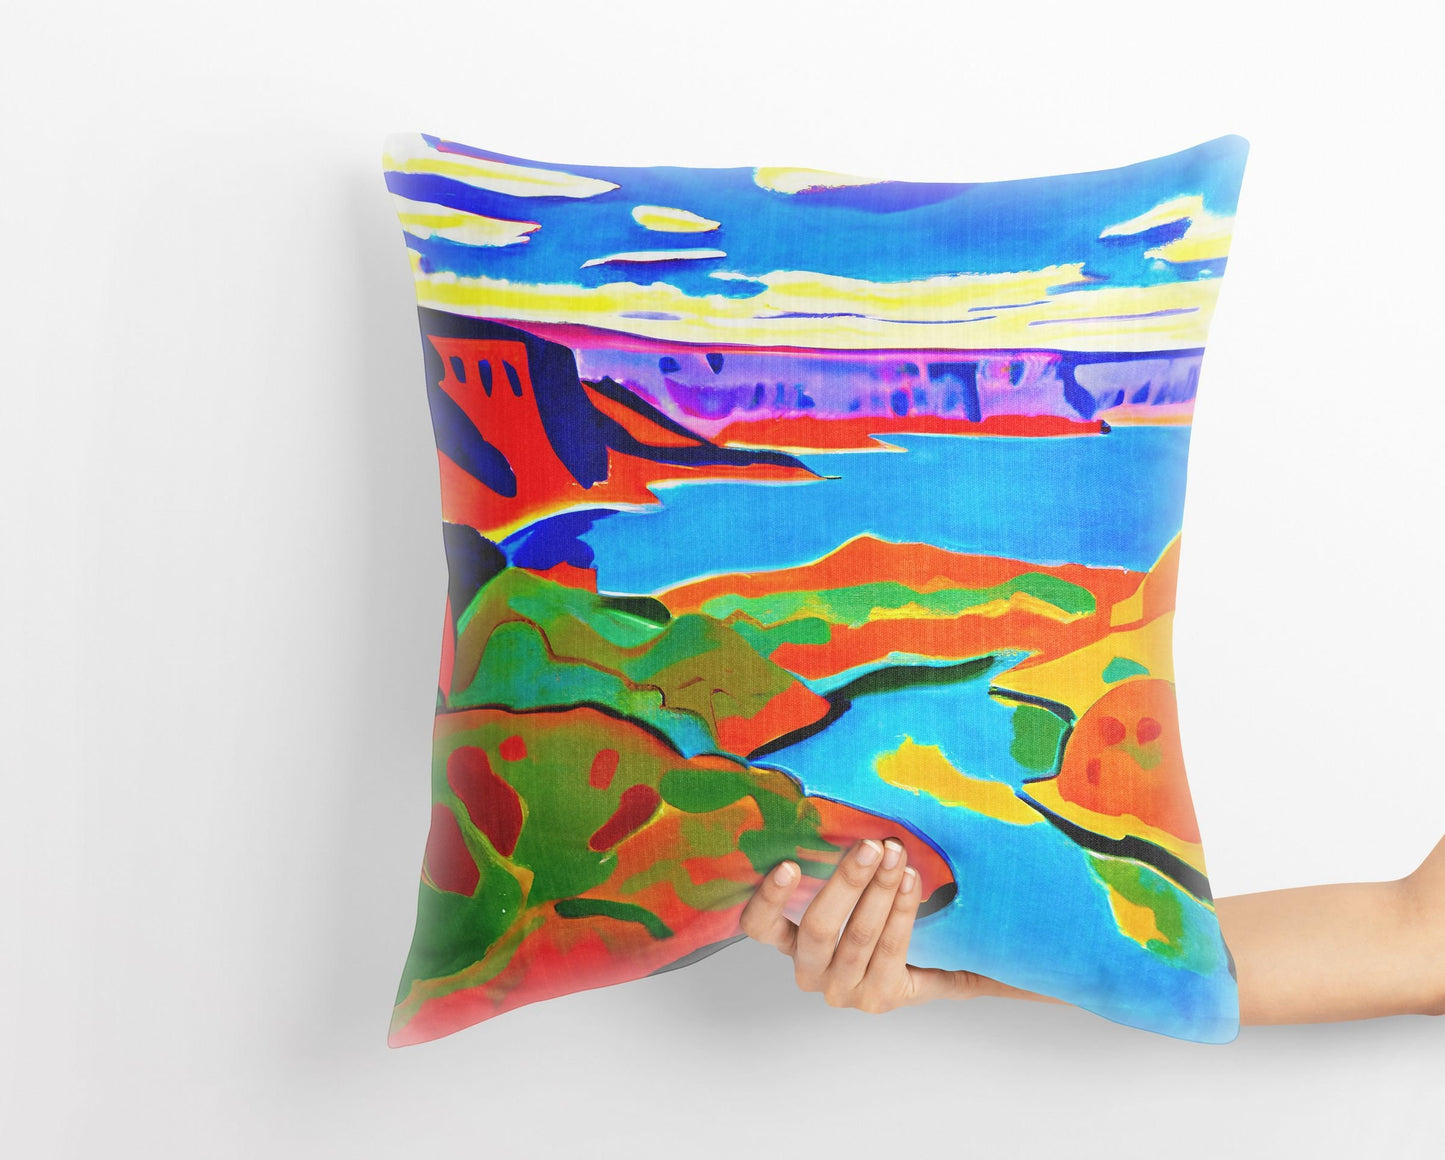 Landscape Art Pillow Case, Abstract Throw Pillow Cover, Colorful Pillow Case, Fashion, Square Pillow, Farmhouse Pillow, Holiday Gift